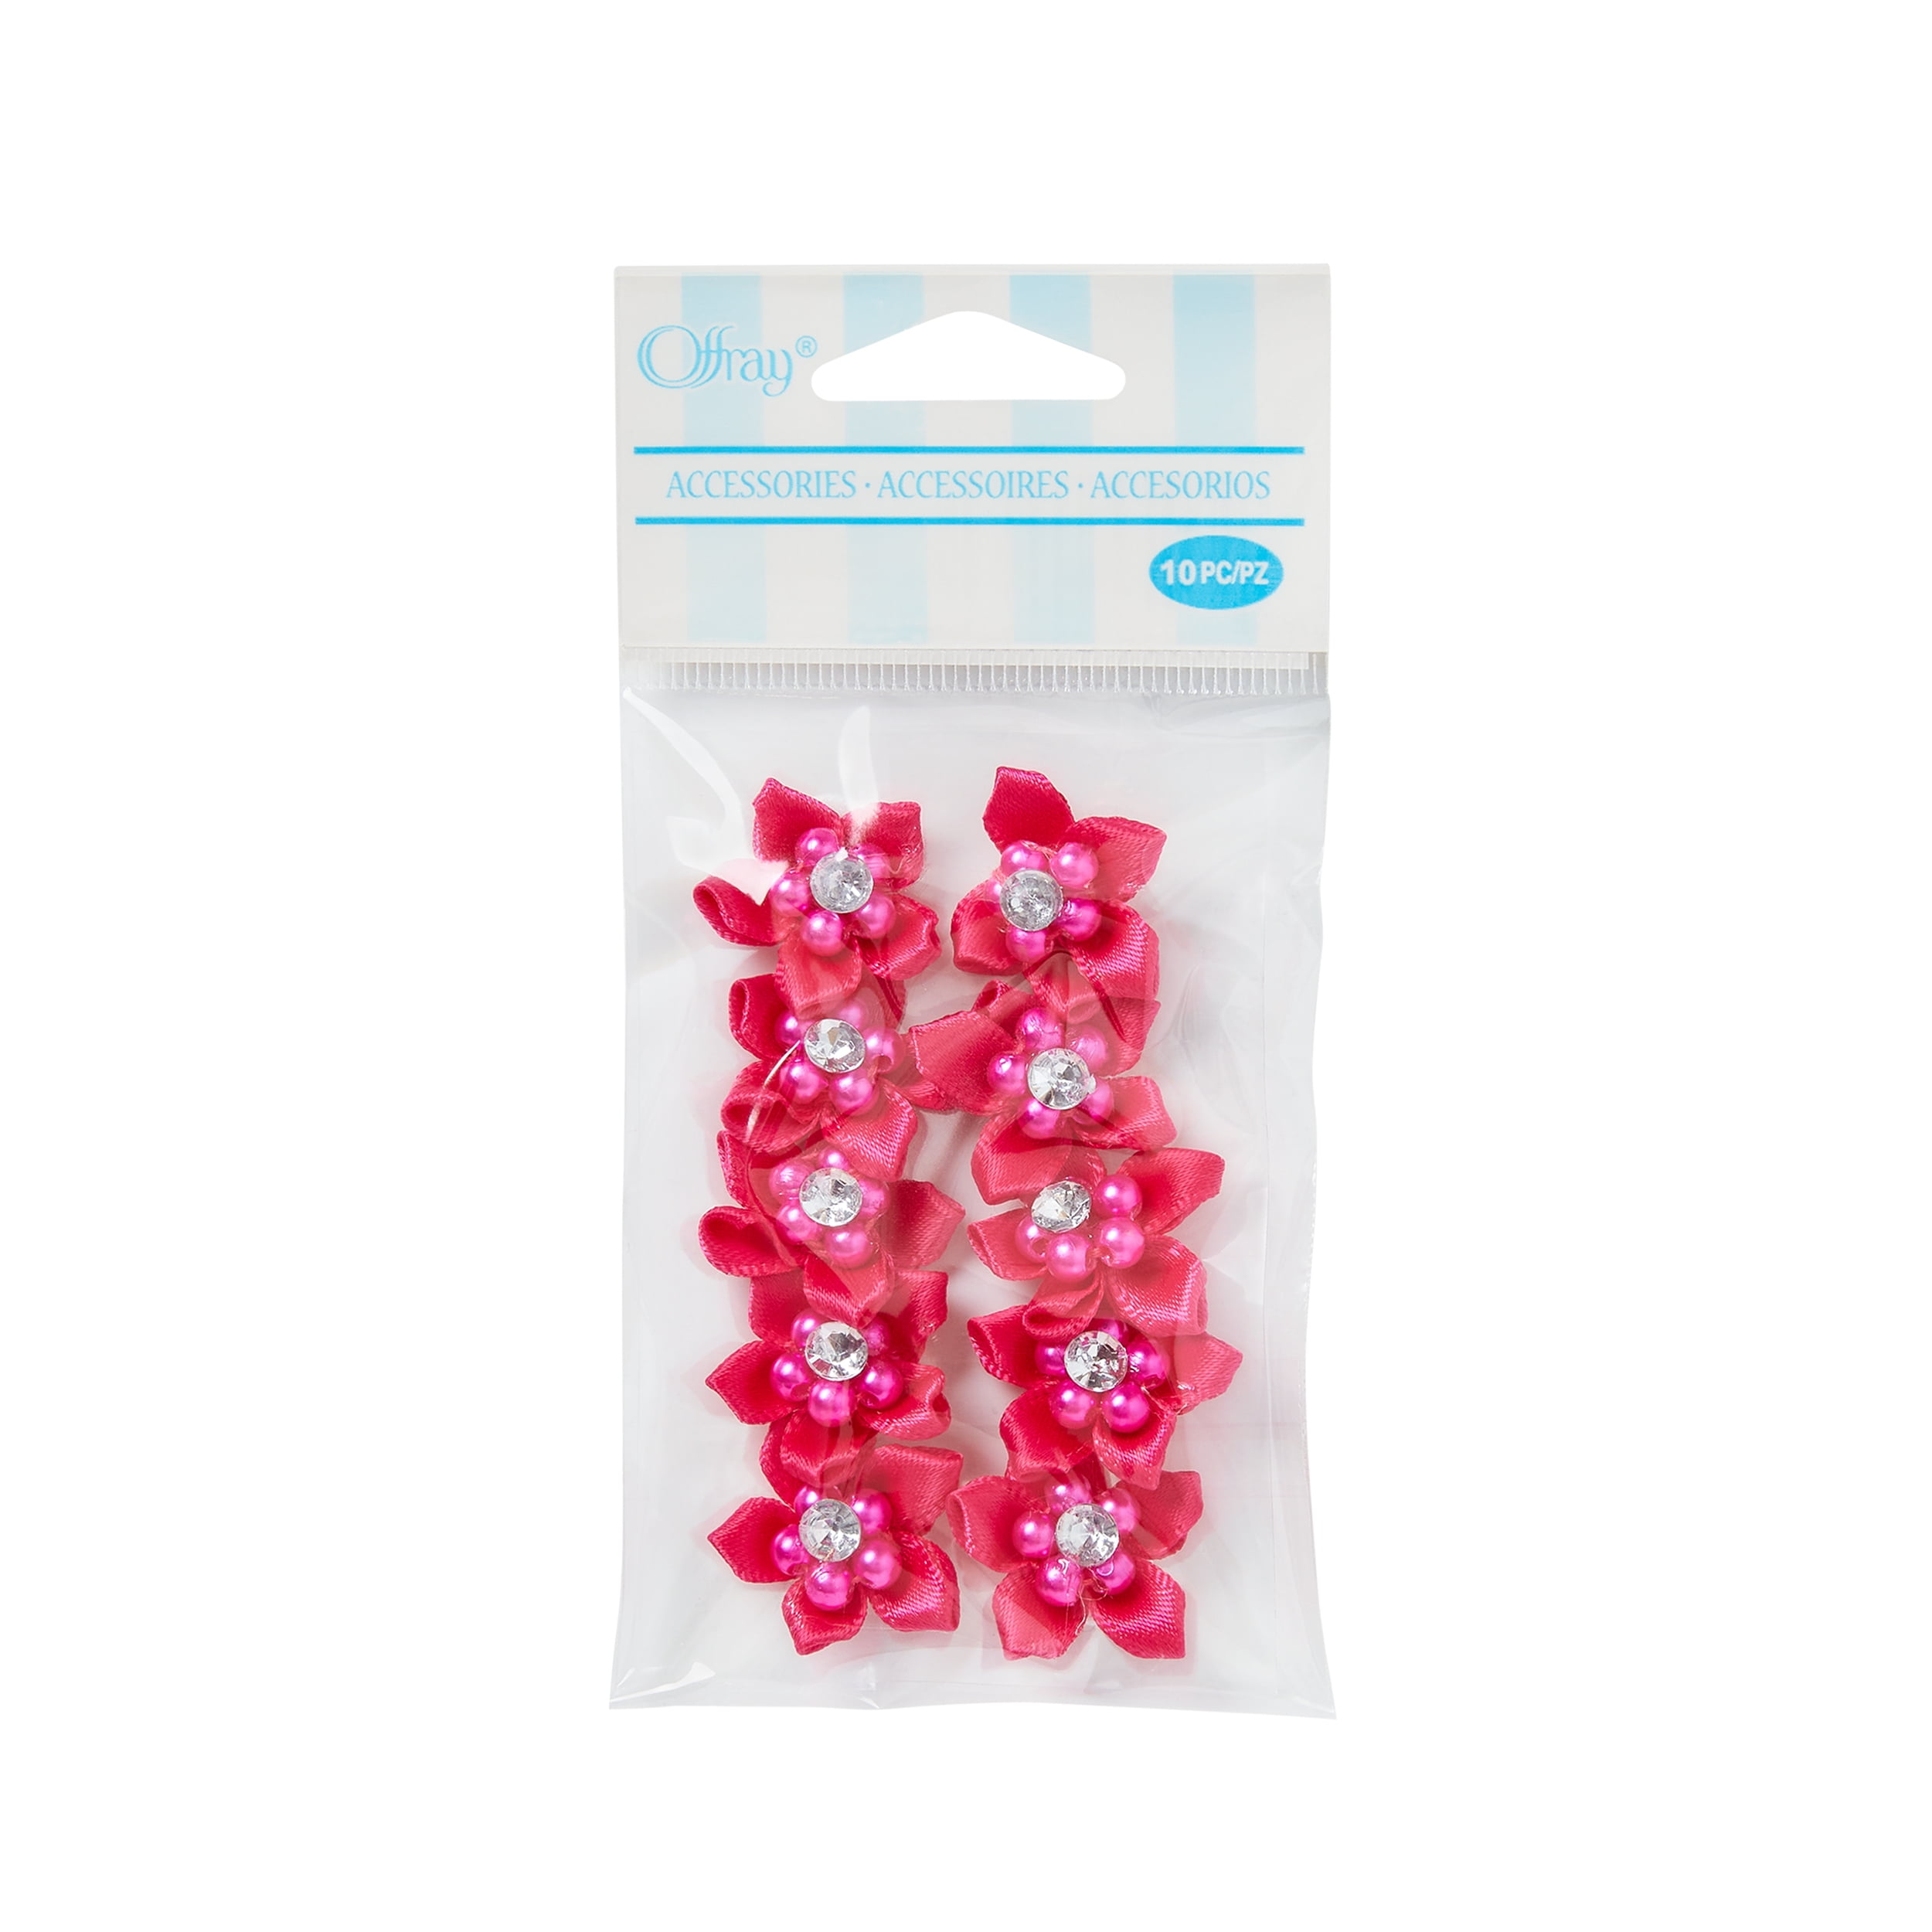 Offray Hot Pink 3/4 inch Value Pack 5 Petal Gem Flower Accessory for Wedding, Hair Clips, and Scrapbooking, 10 Pieces, 1 Package